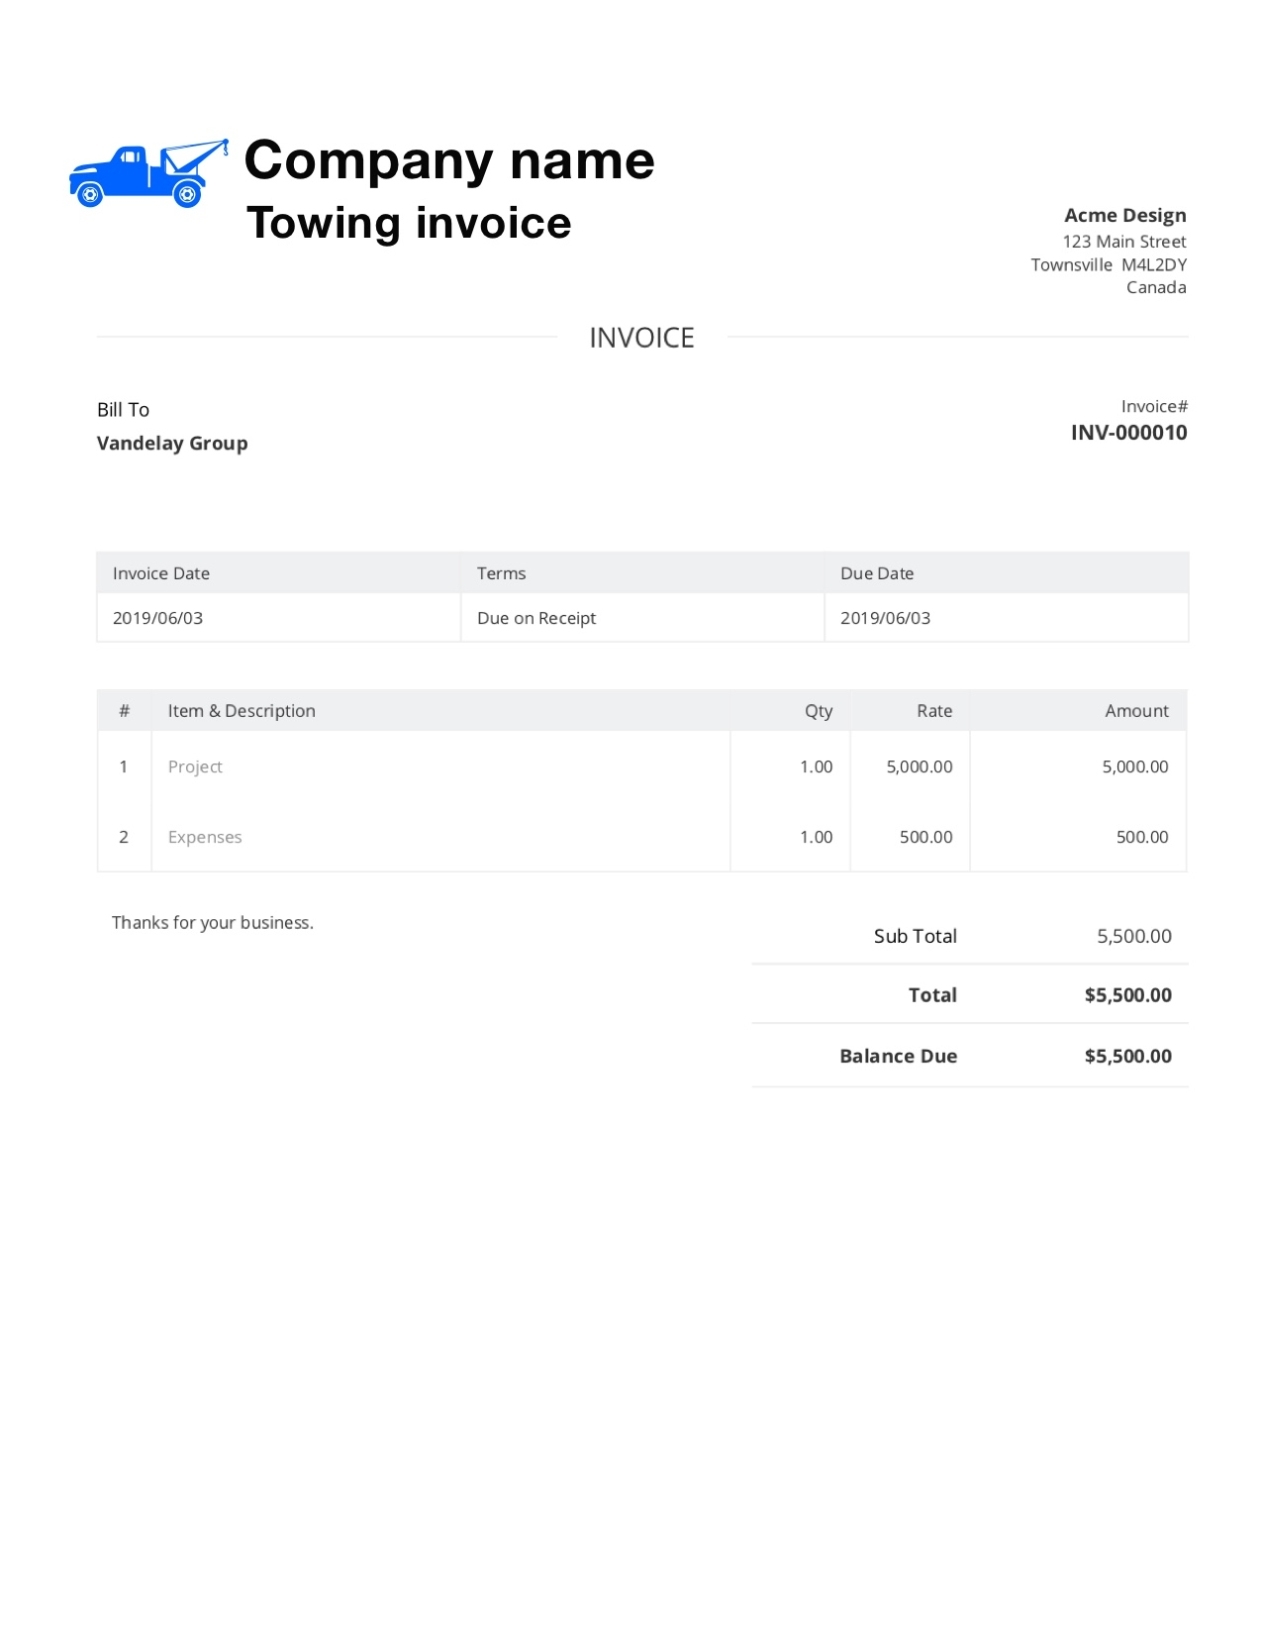 Free Towing Invoice Template. Customize And Send In 90 Seconds For Towing Business Plan Template